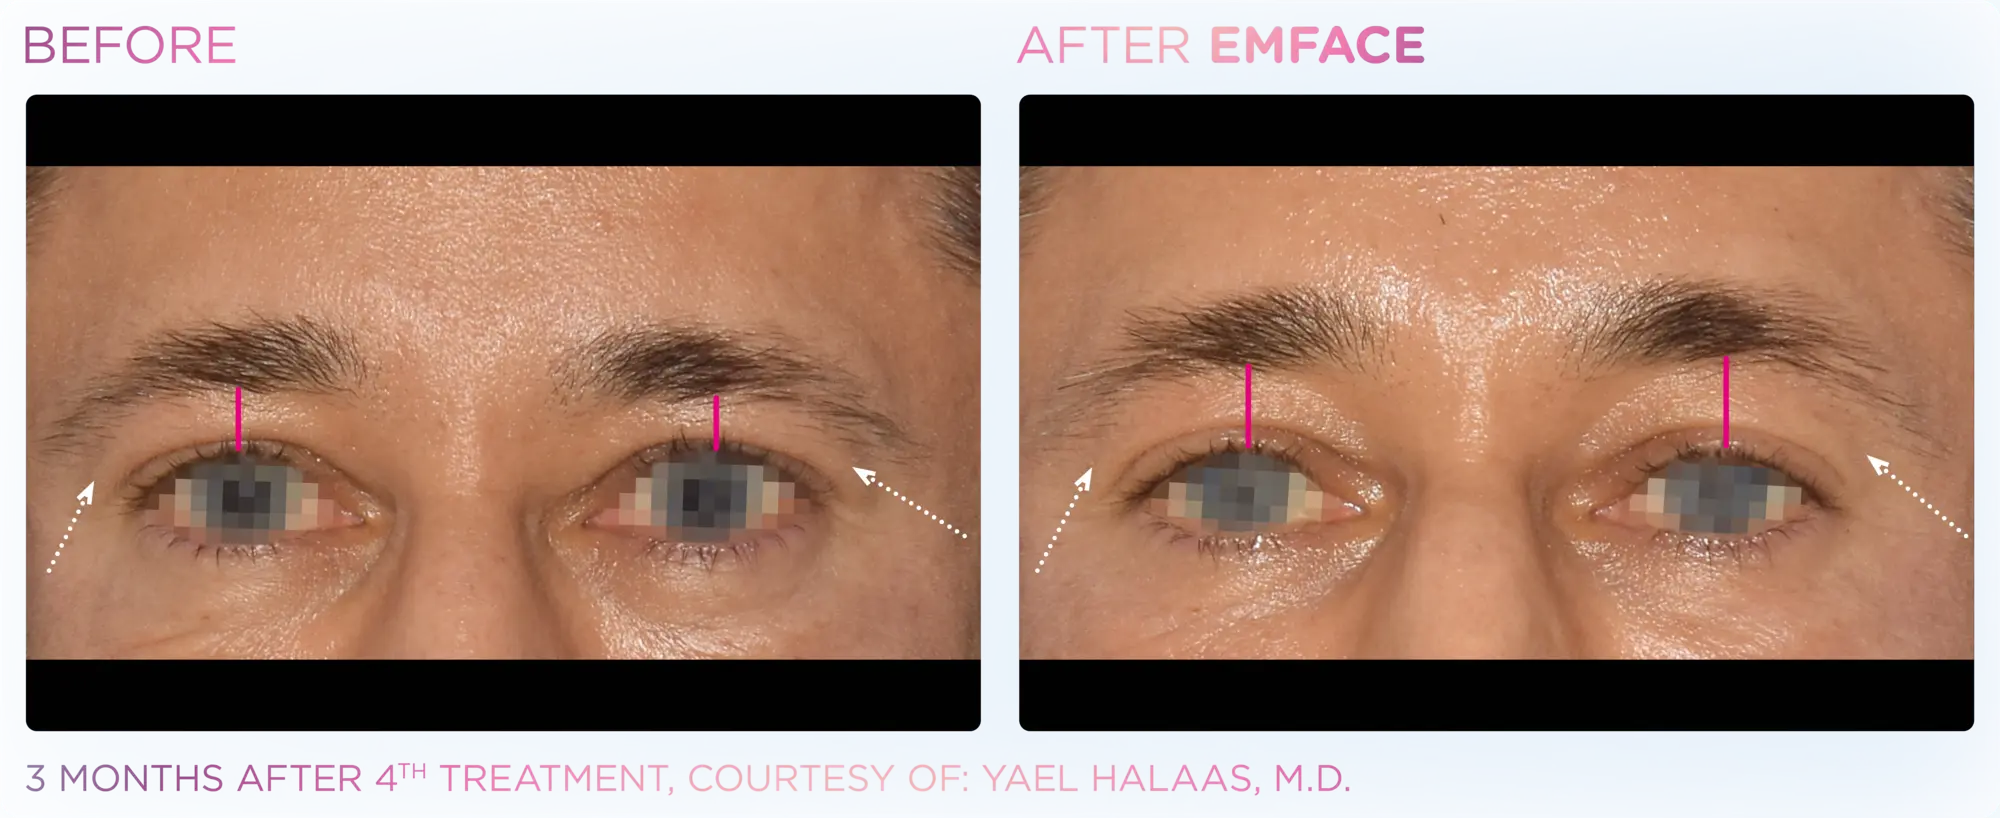 EMFACE Brow - Before and After